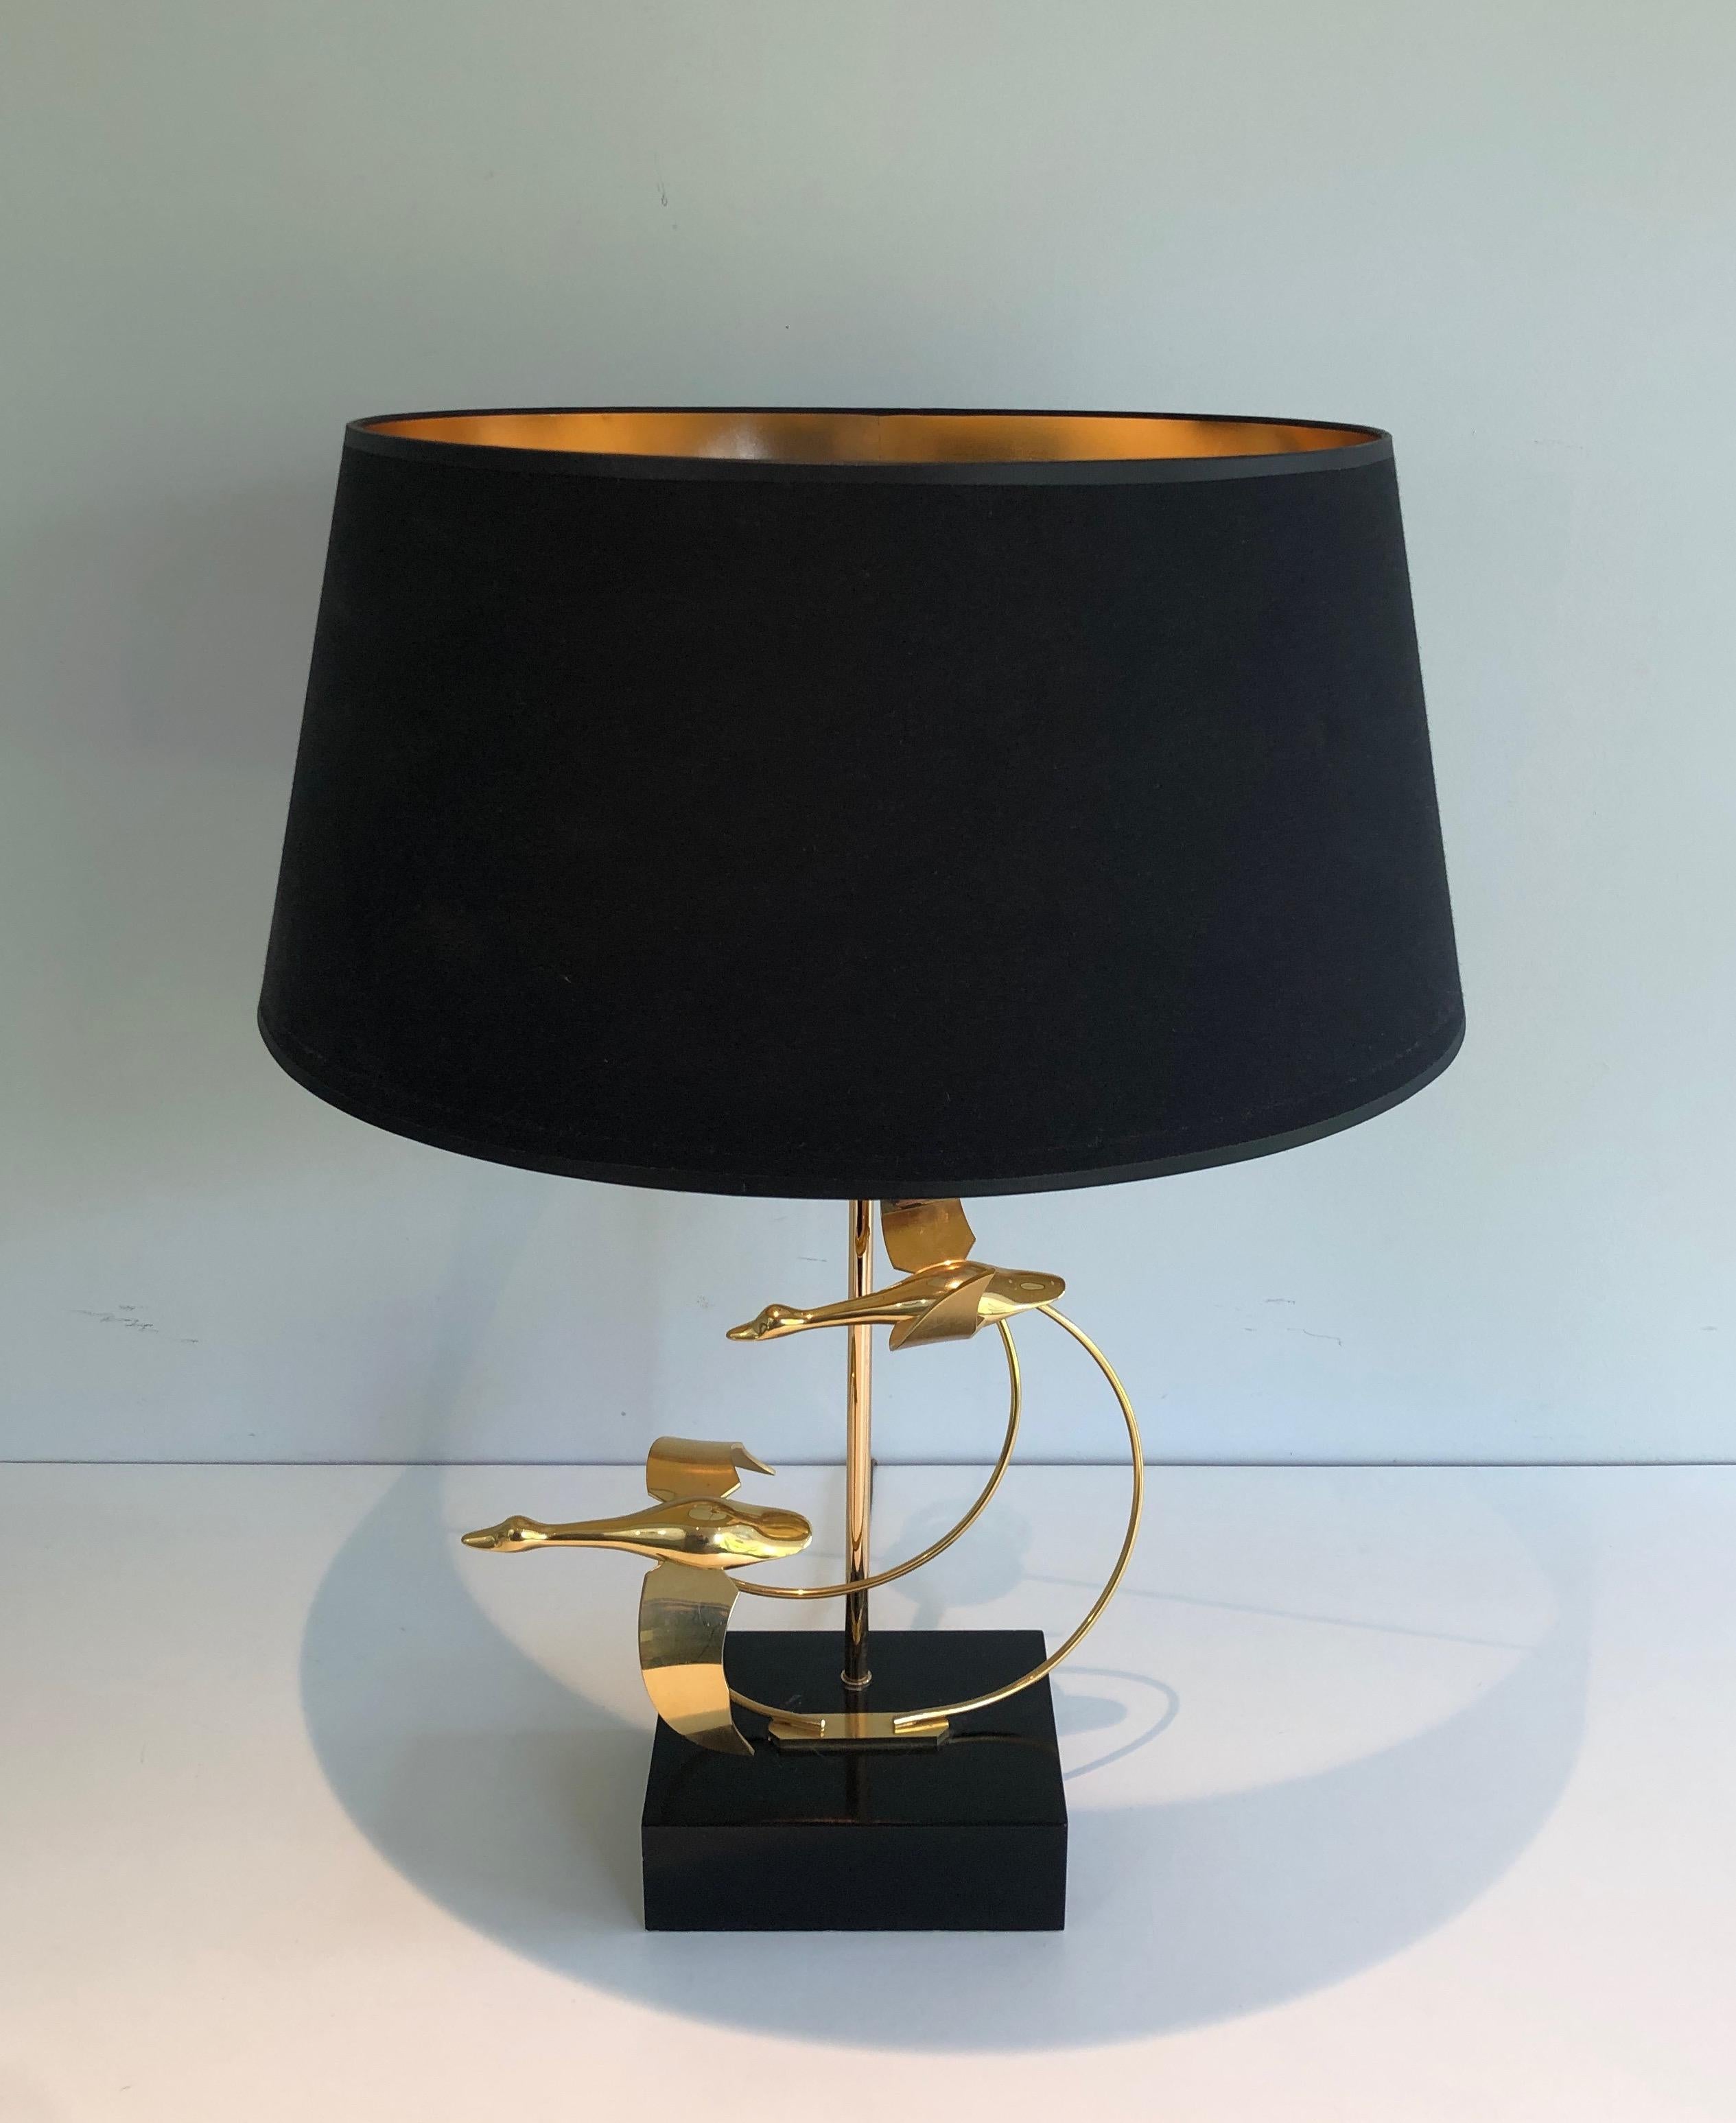 Flock of Wild Geese Brass Table Lamp, French, circa 1970 For Sale 11